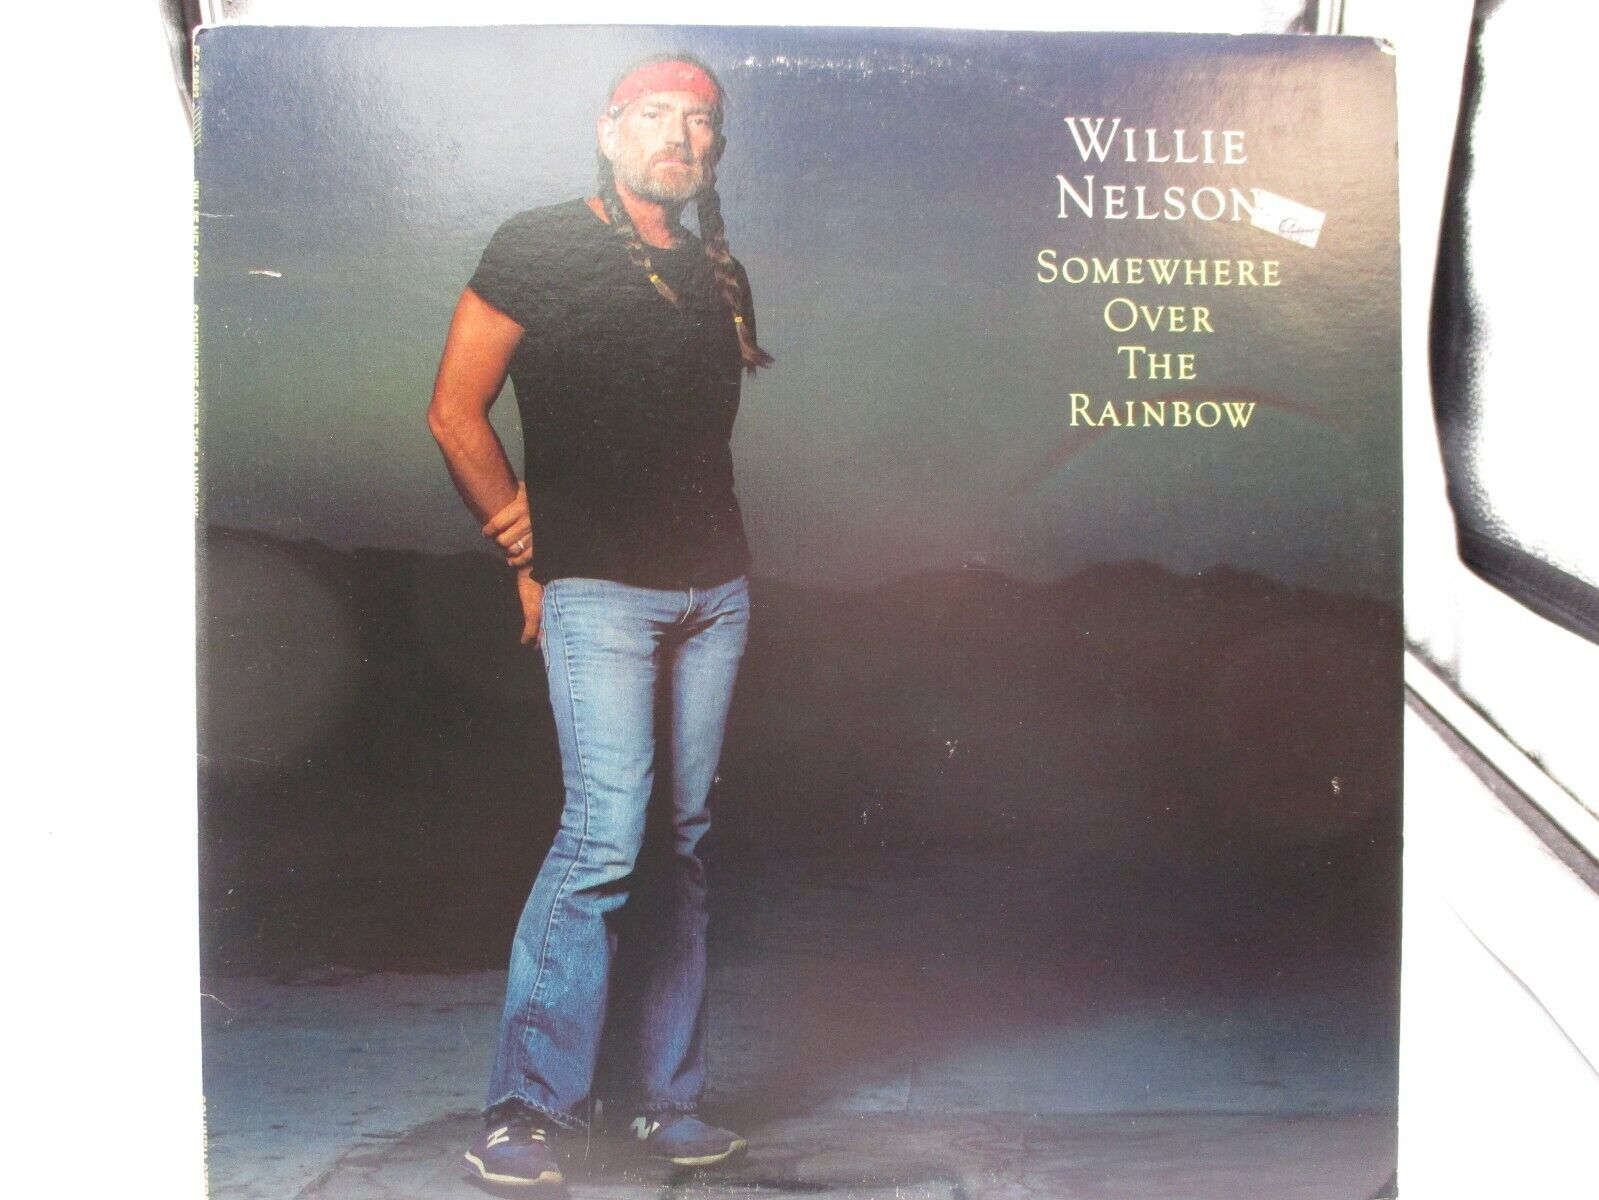 Willie Nelson Somewhere Over The Rainbow 1981 Promo LP Columbia FC36883 VG++ VG+